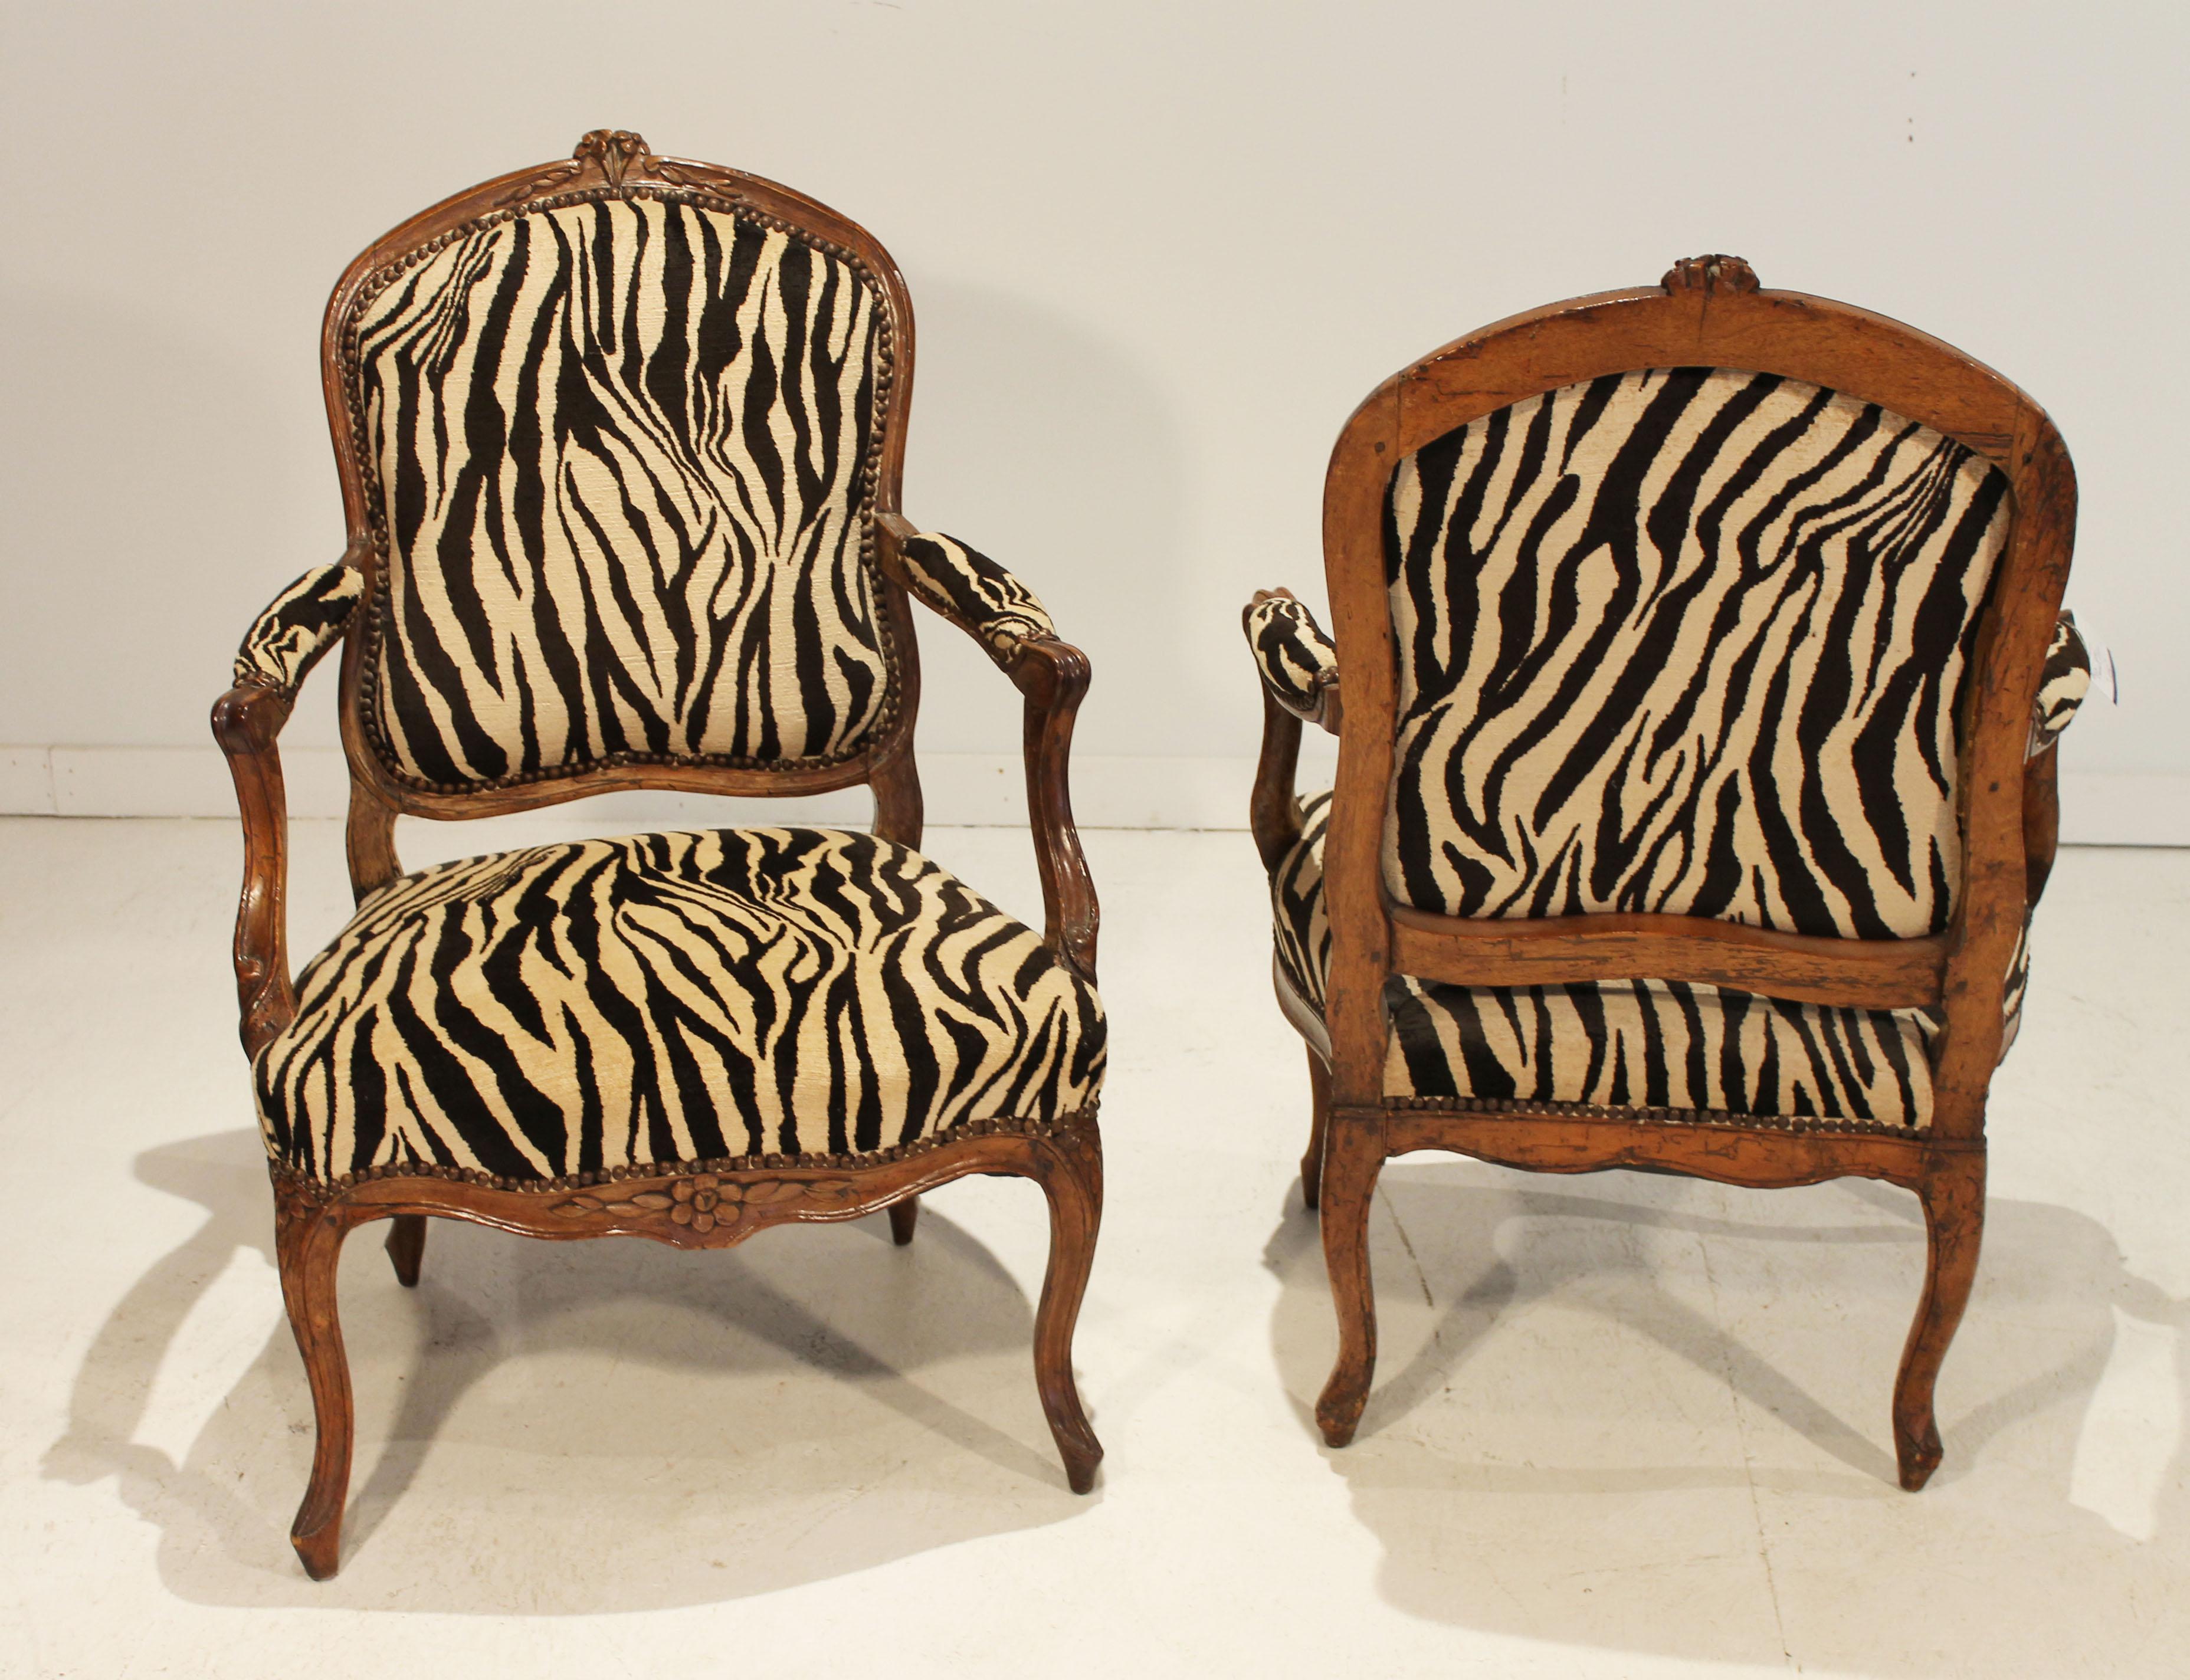 This pair of sophisticated French 18th Century Louis XV Arm Chairs with a gorgeous zebra print fabric and nail head accents would look beautiful in your living room or study. 
The elegant cabriole legs are adorned with the lovely delicate flower